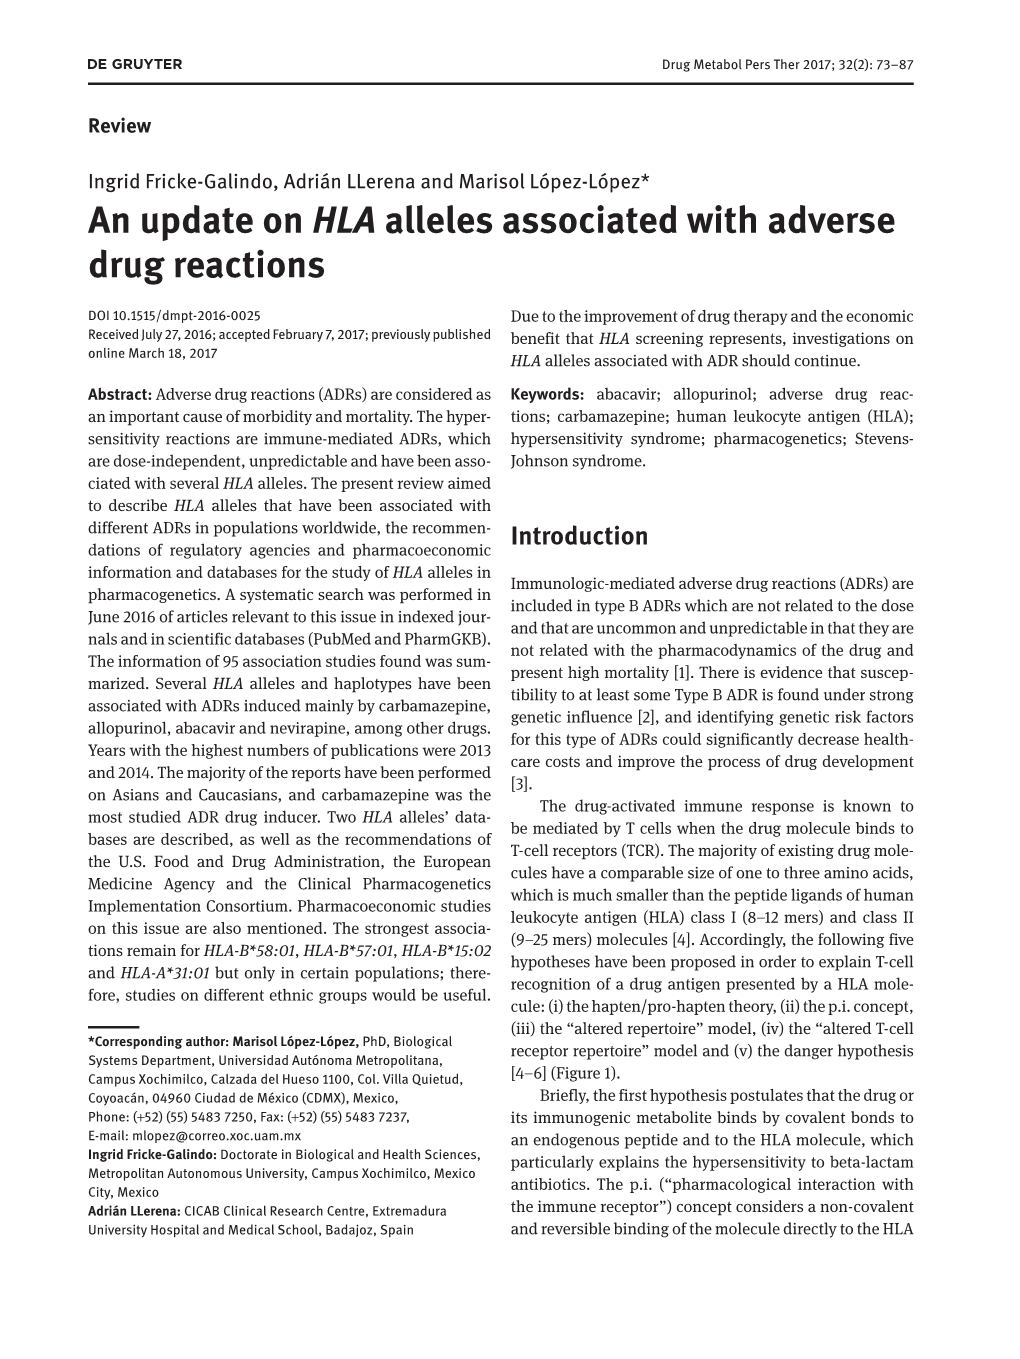 An Update on HLA Alleles Associated with Adverse Drug Reactions